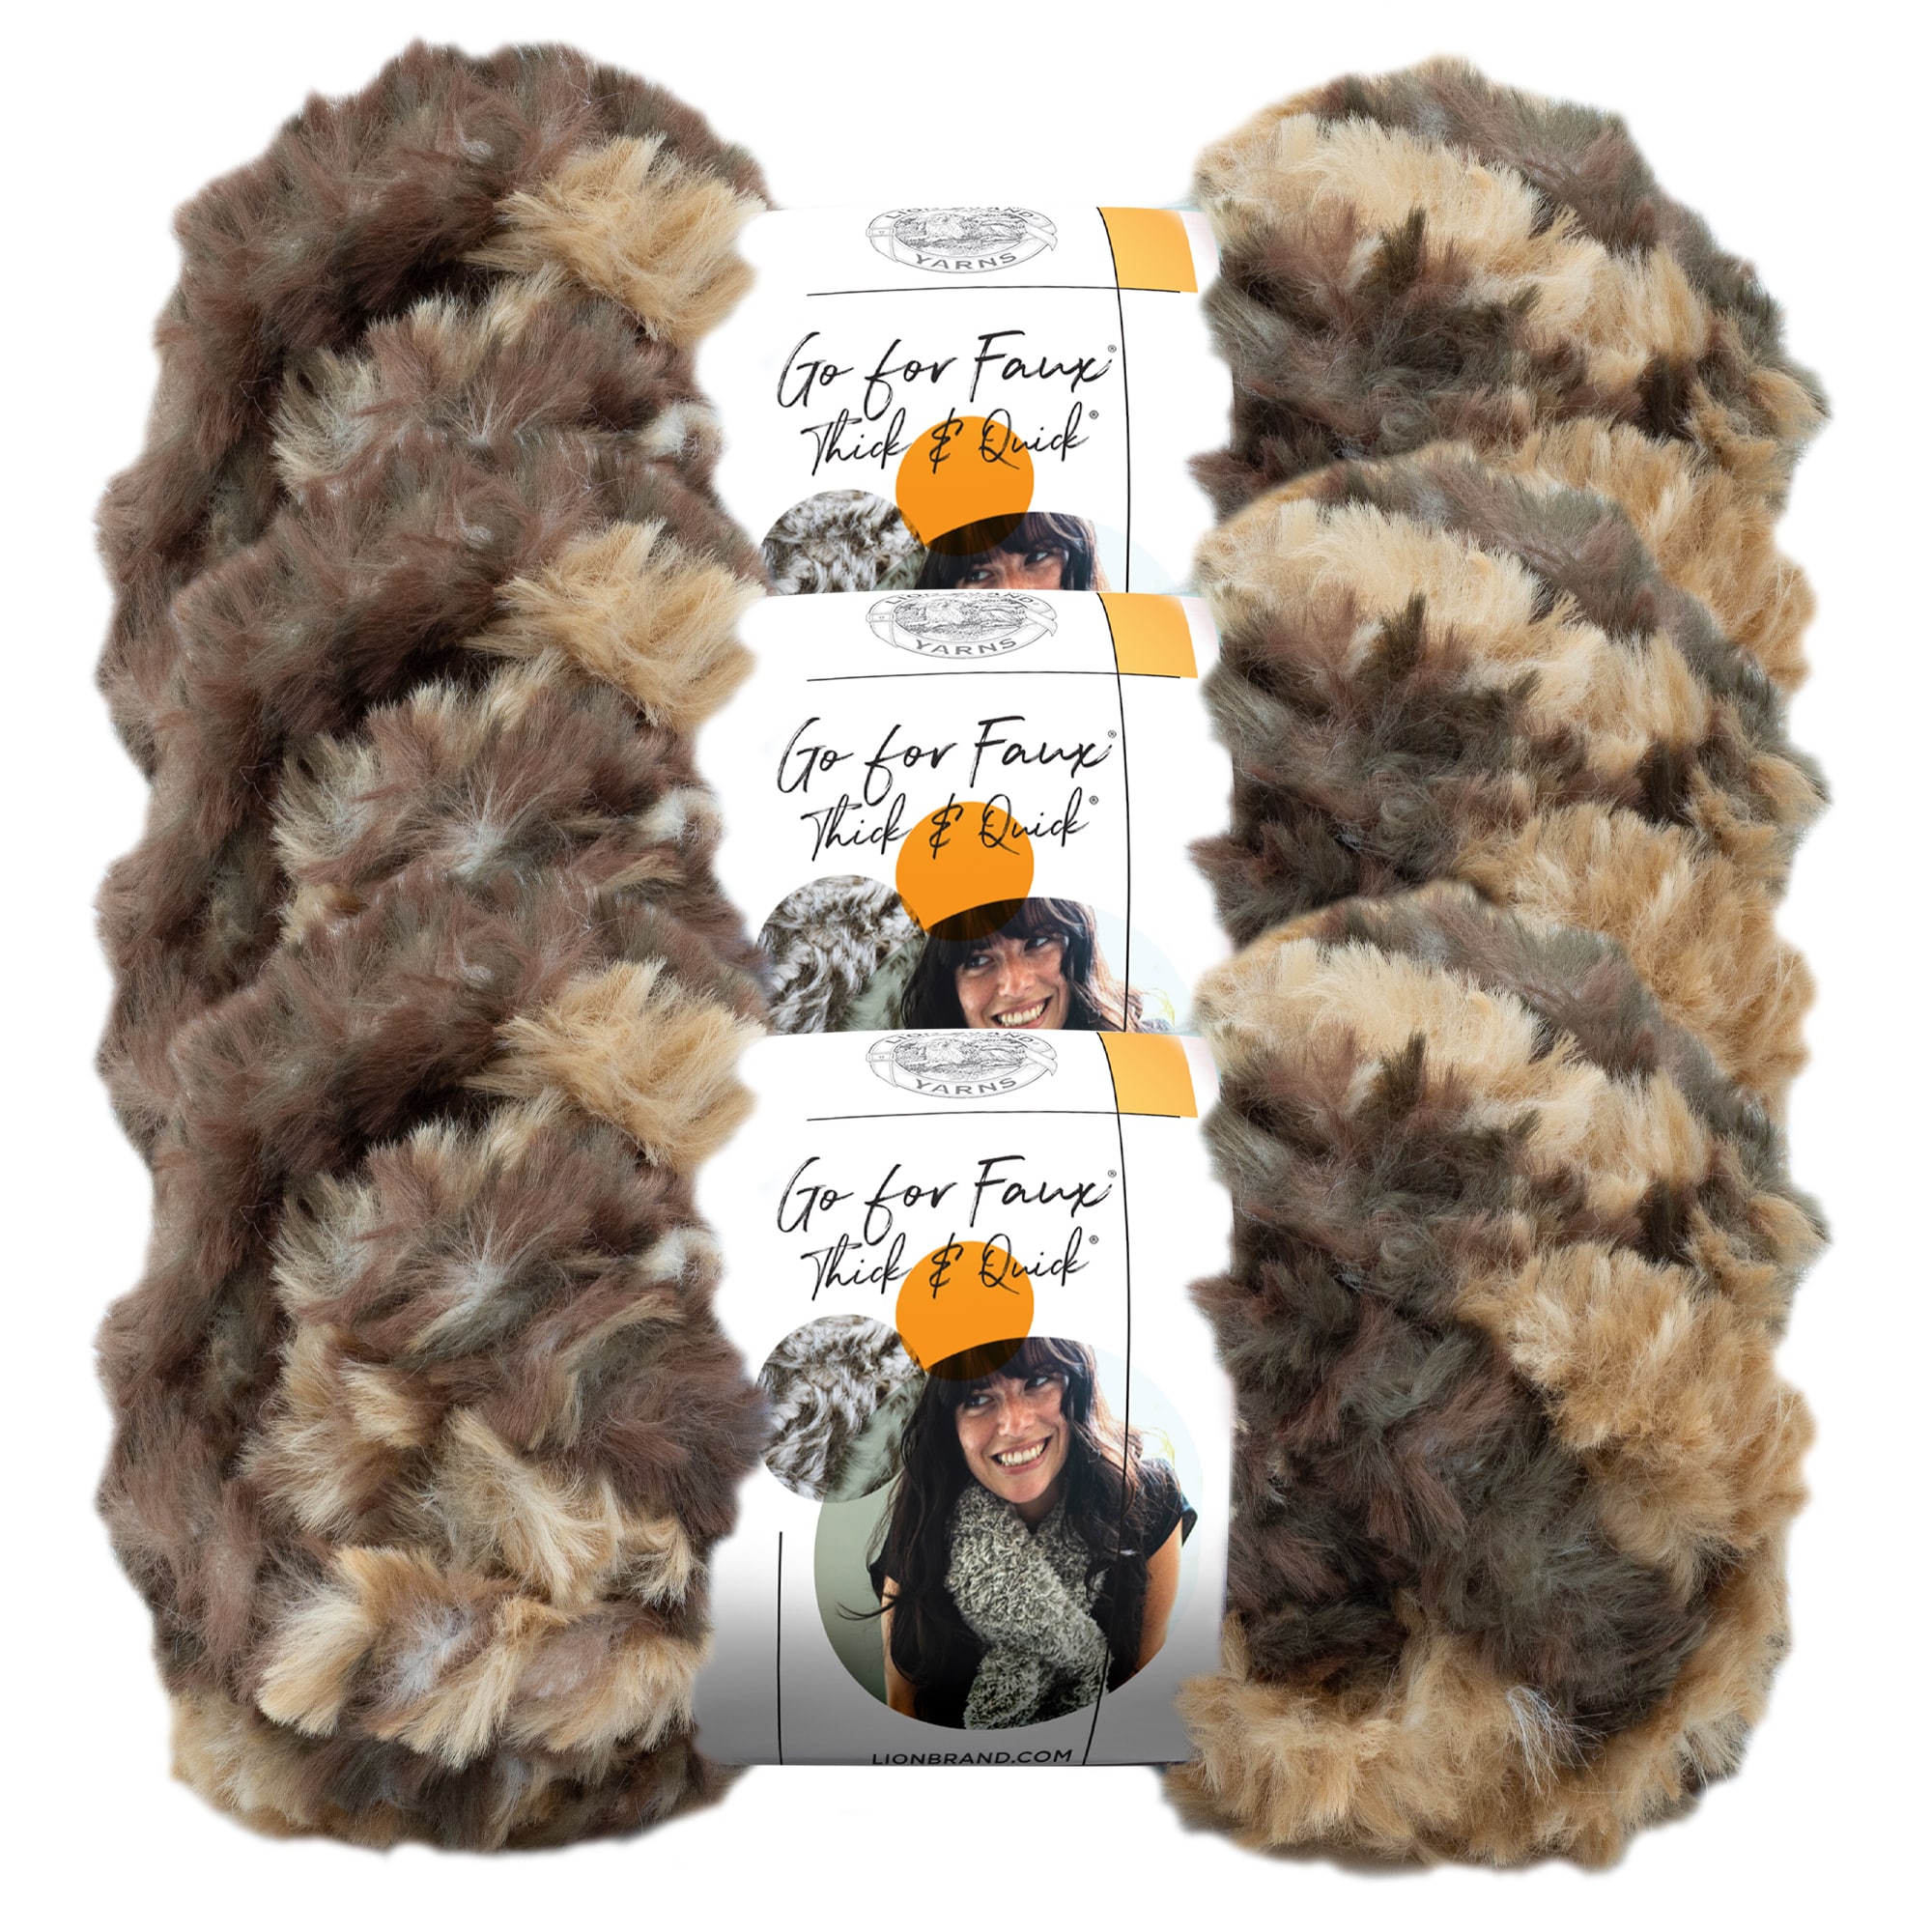  (3 Pack) Lion Brand Yarn Go for Faux Thick & Quick Bulky Yarn,  Baked Alaska